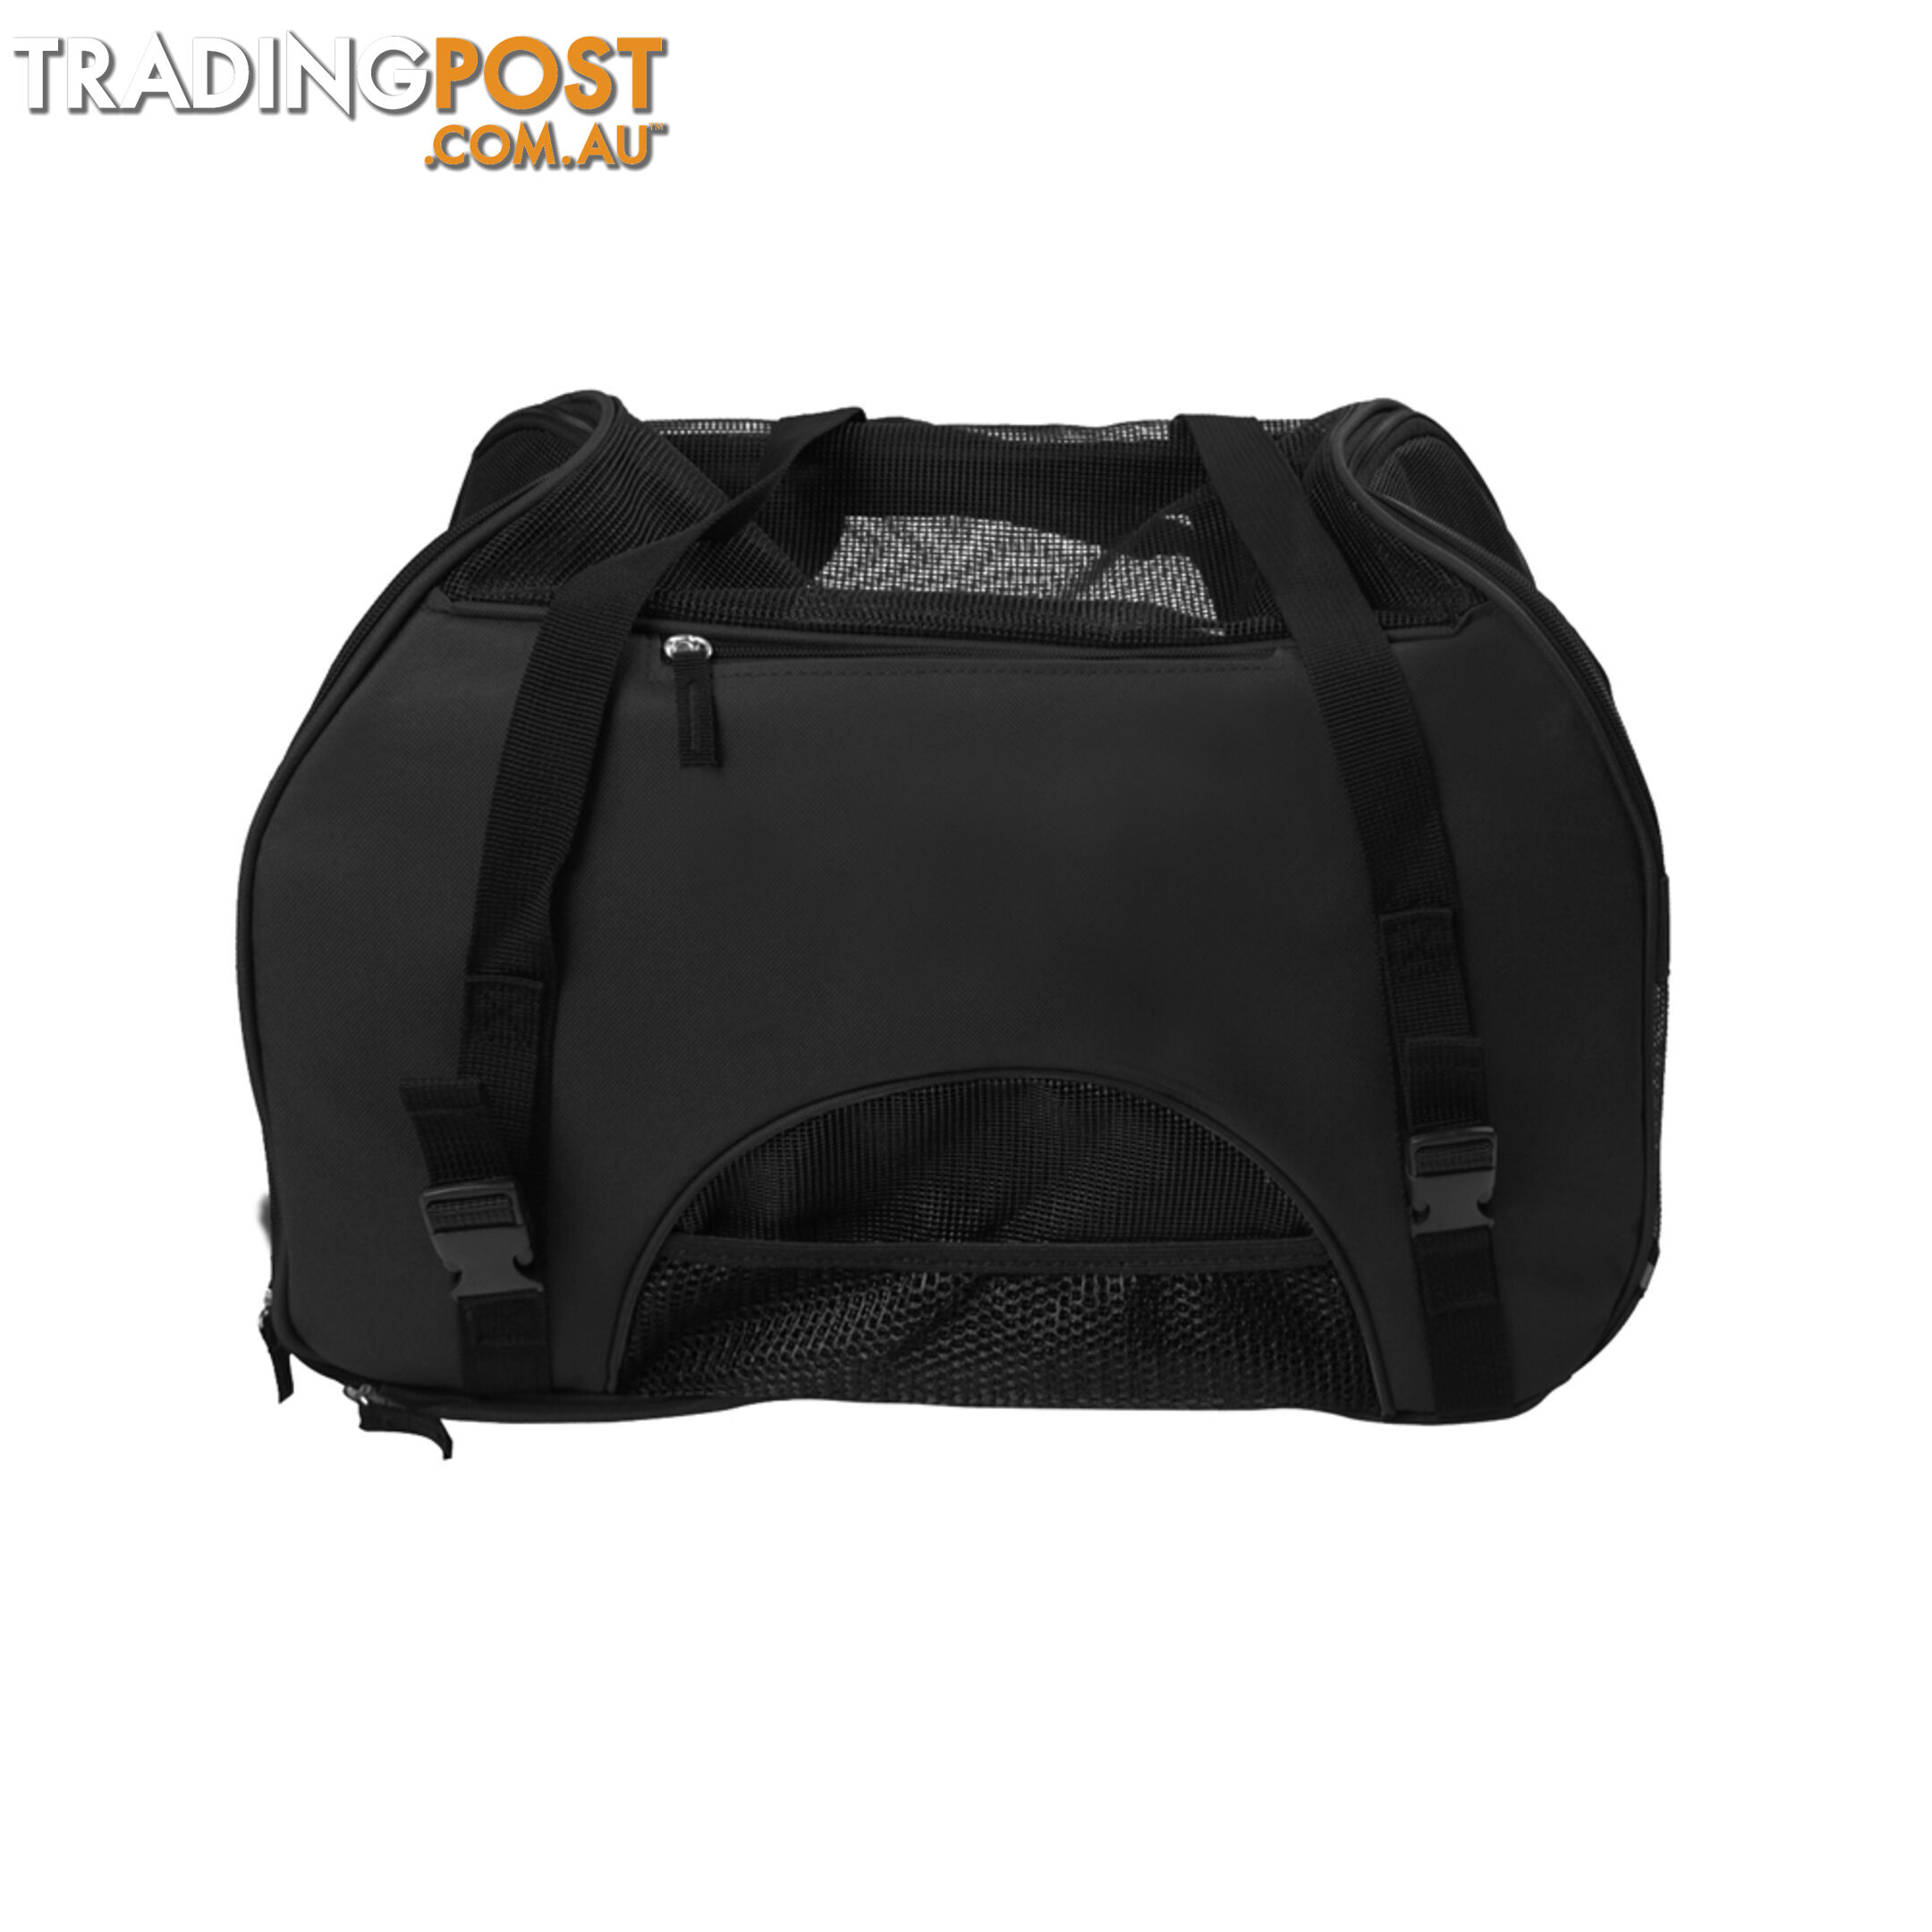 Portable Pet Carrier with Safety Leash - Black